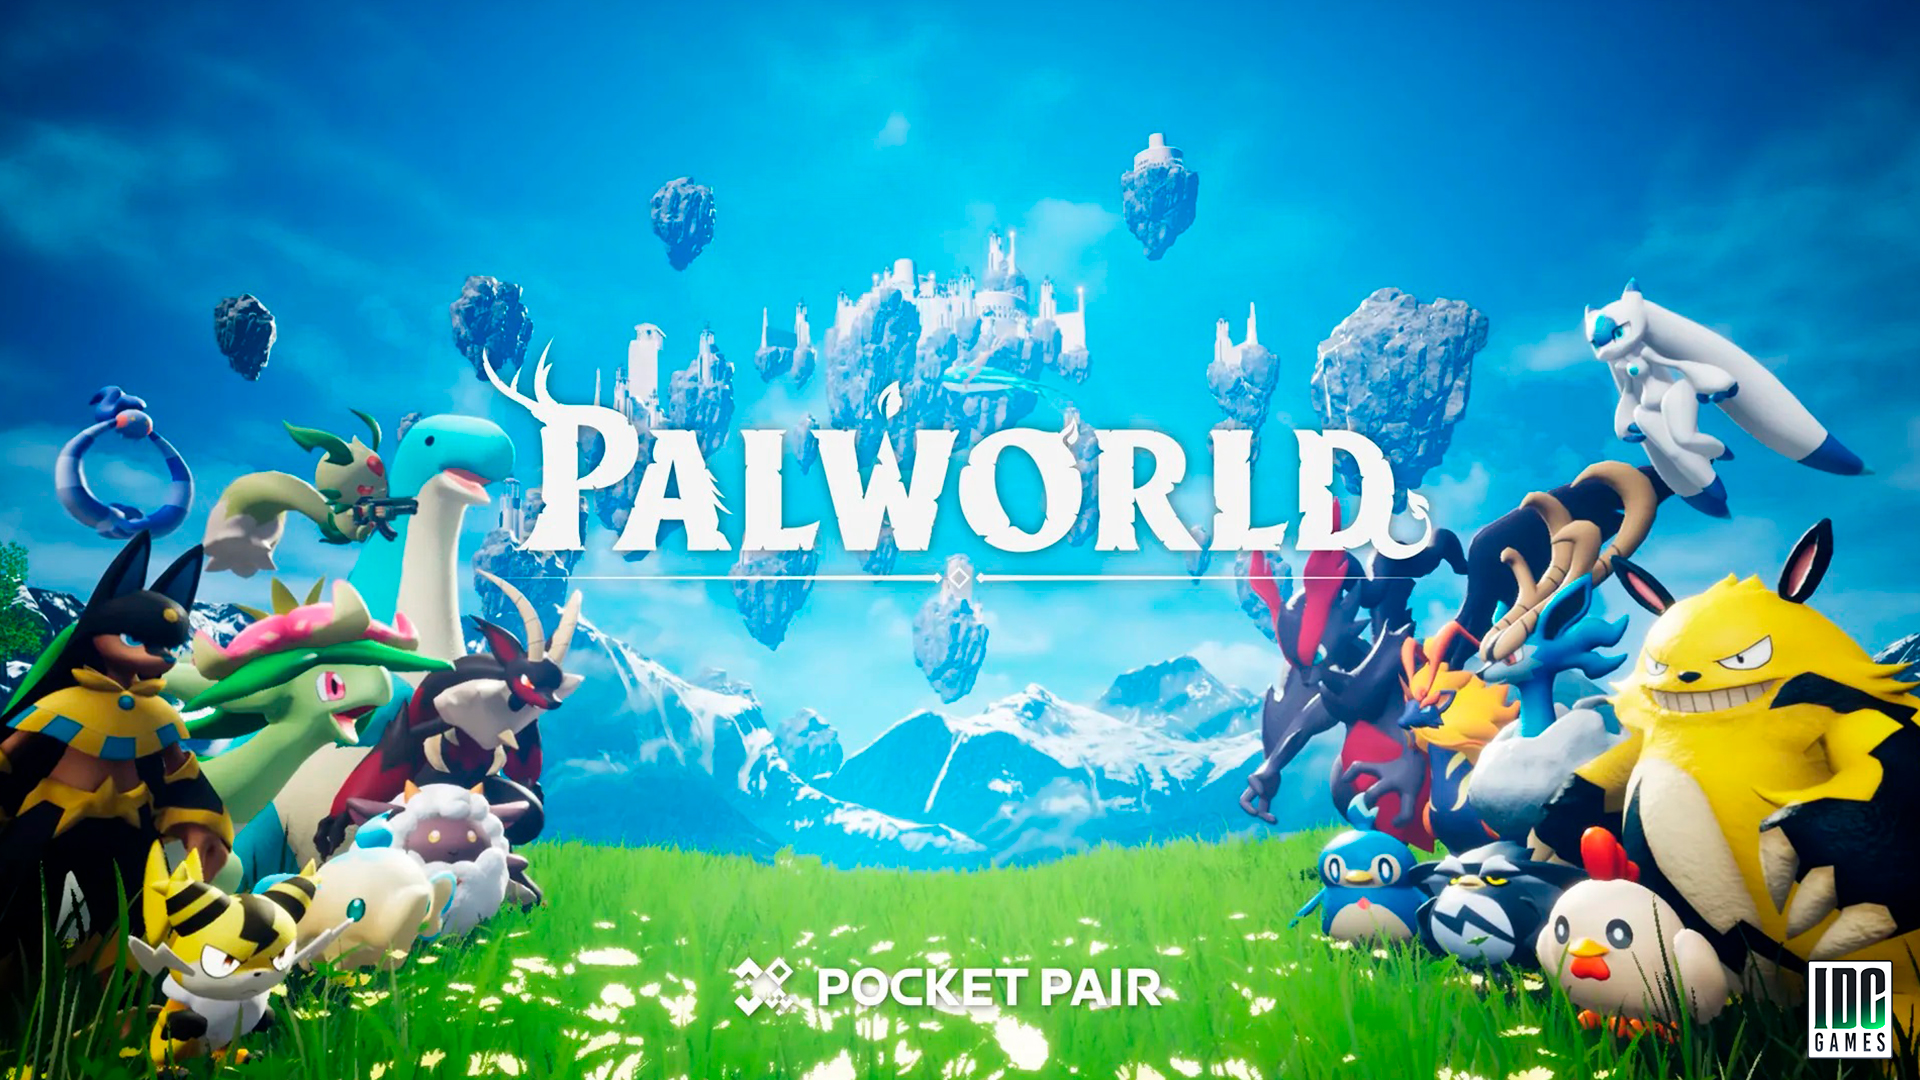 Palworld: A case study on the rapid rise and success of games development